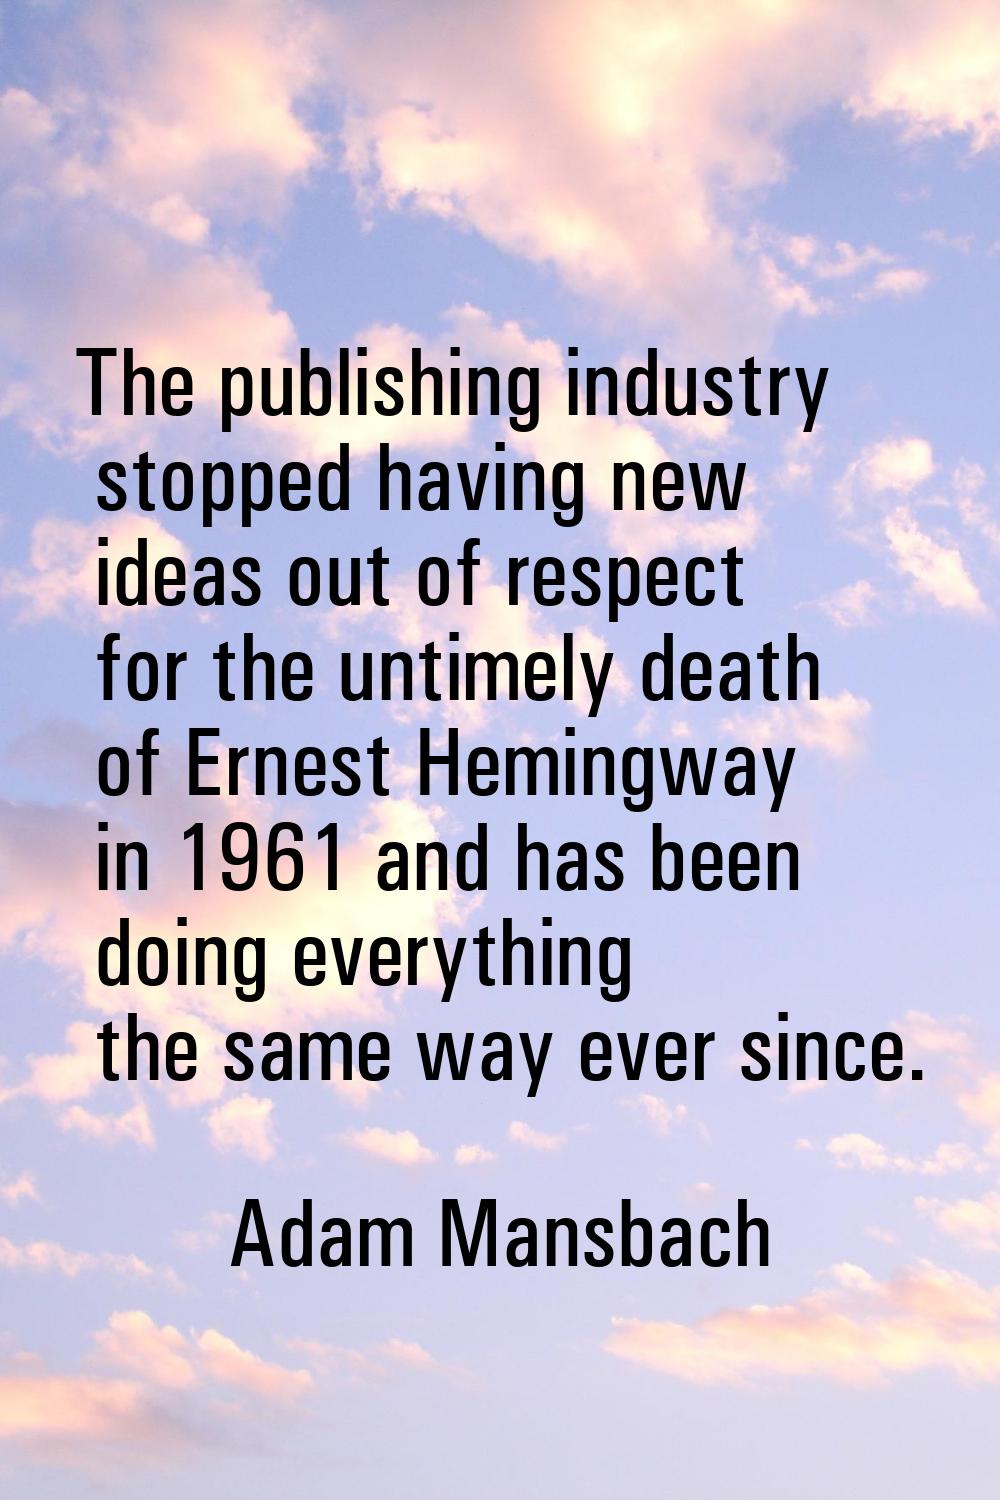 The publishing industry stopped having new ideas out of respect for the untimely death of Ernest He